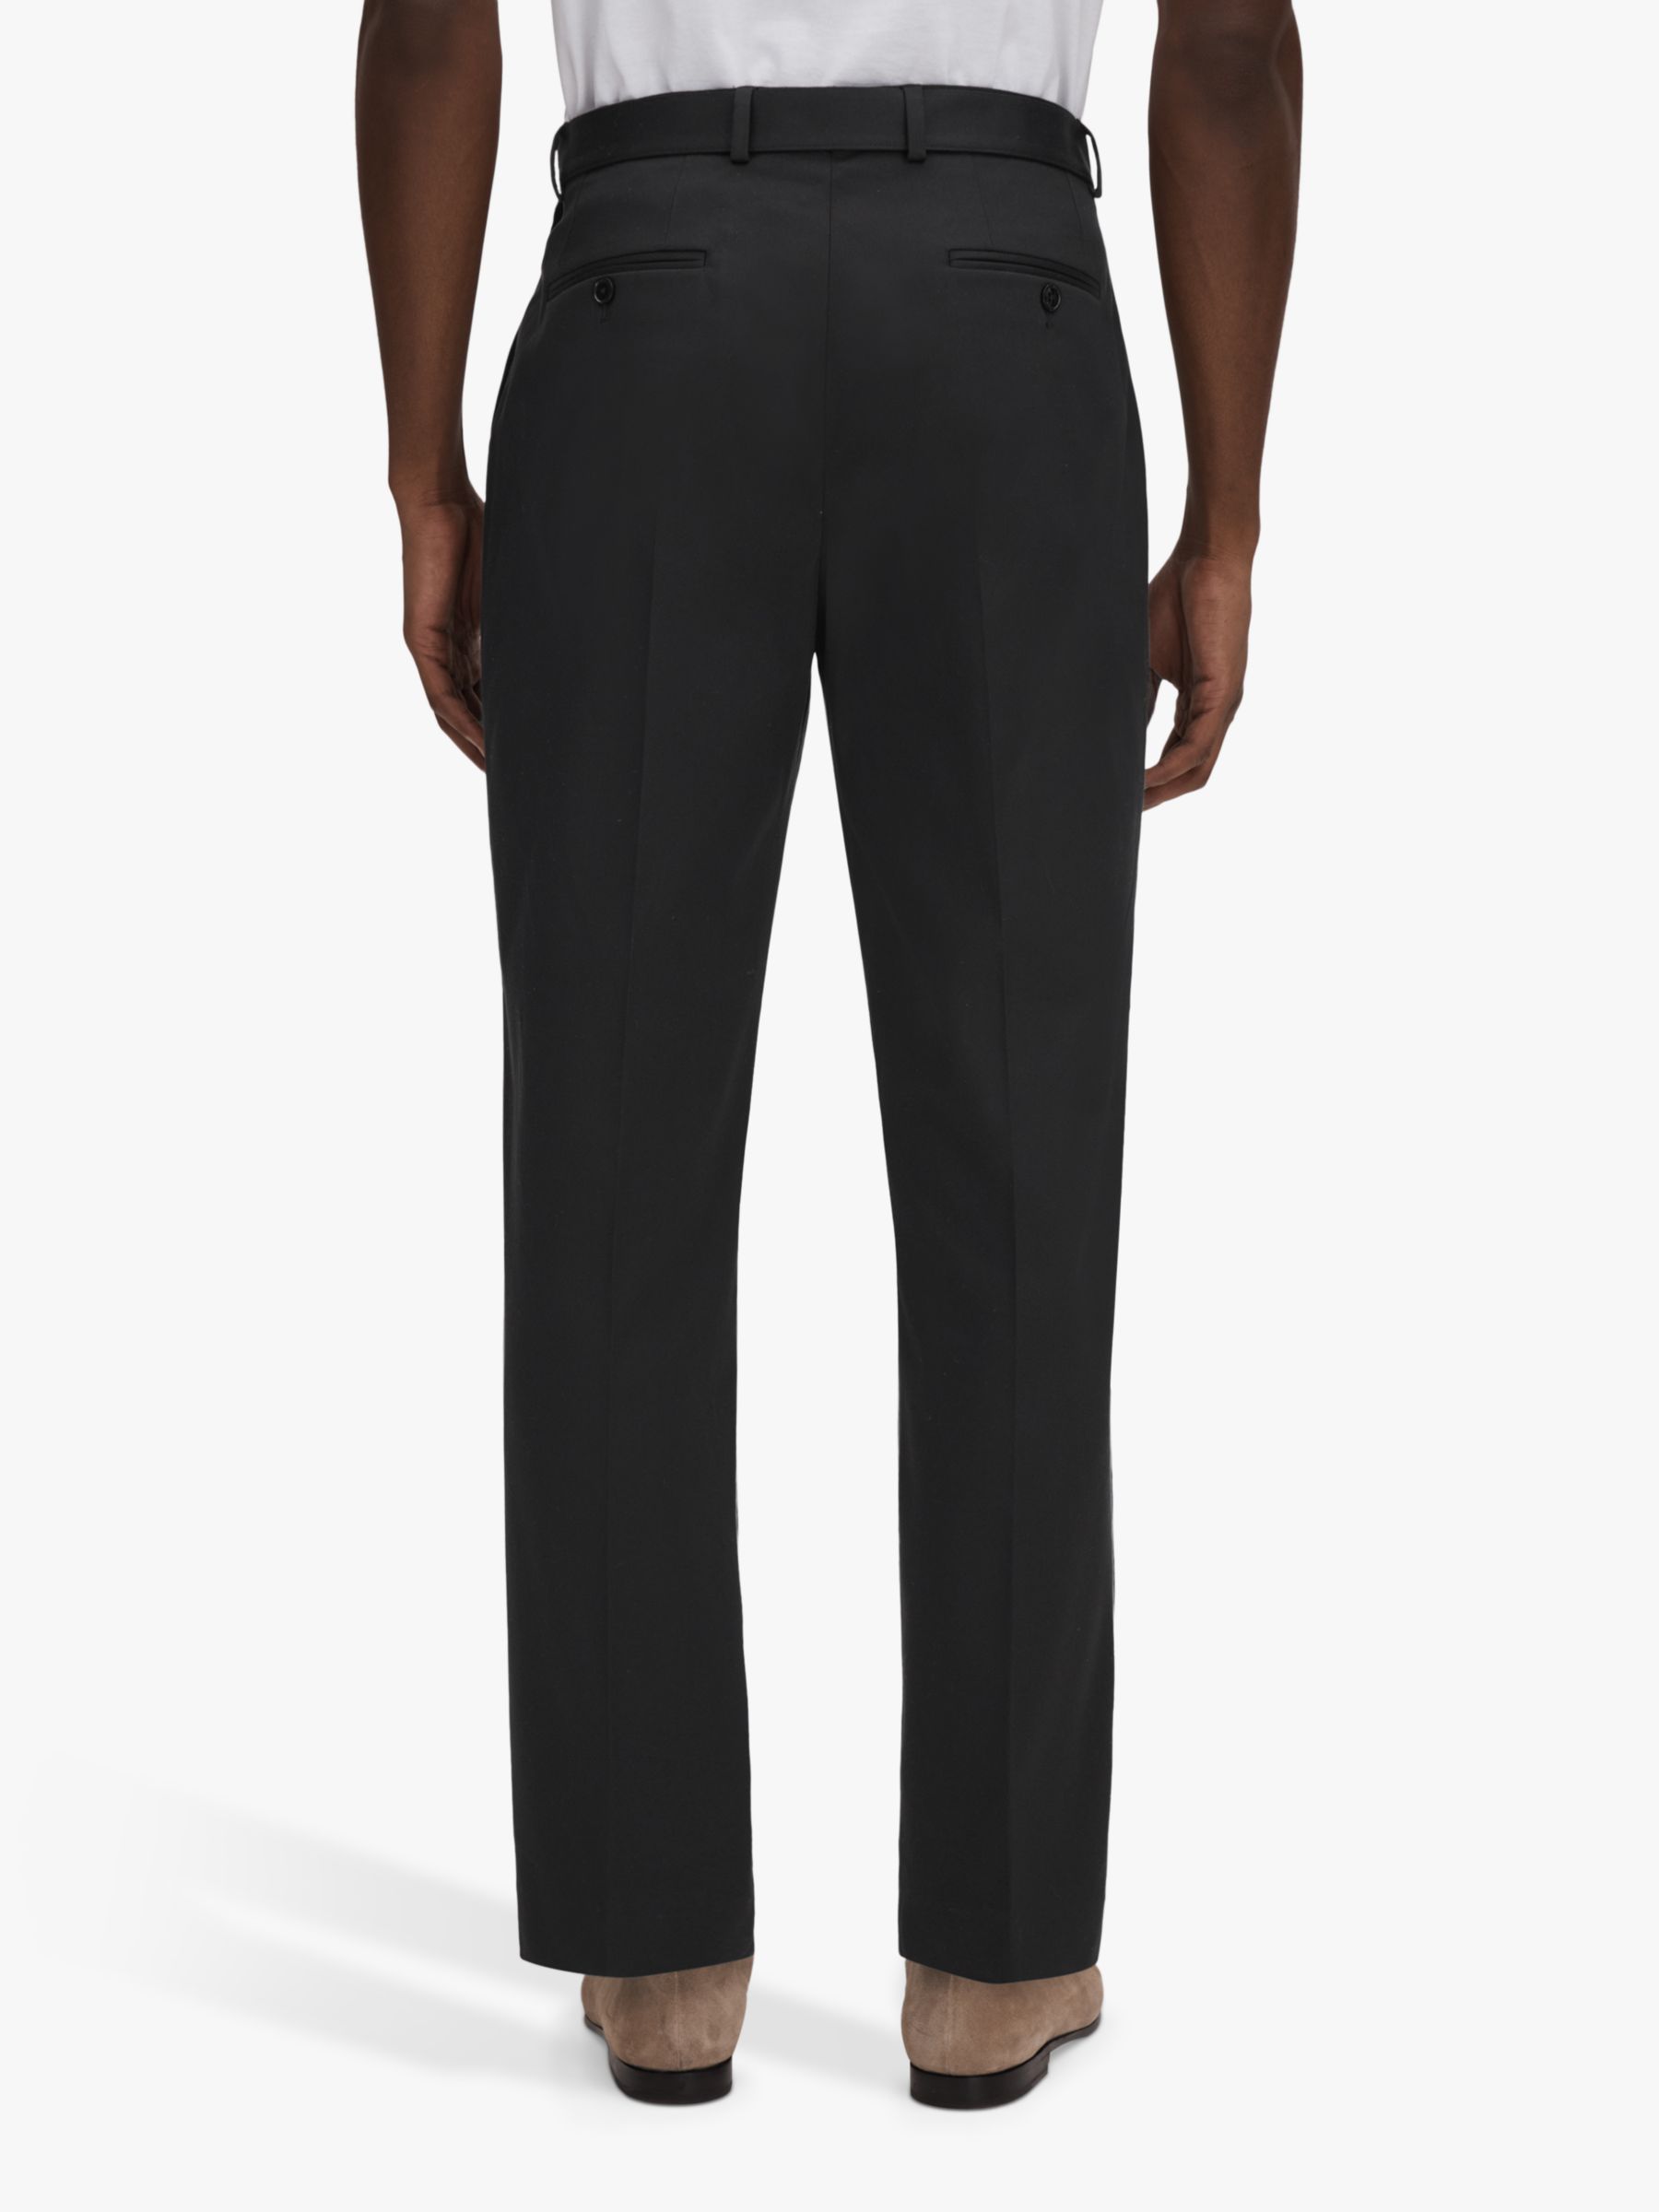 Buy Reiss Liquid Belted Tapered Trousers, Black Online at johnlewis.com